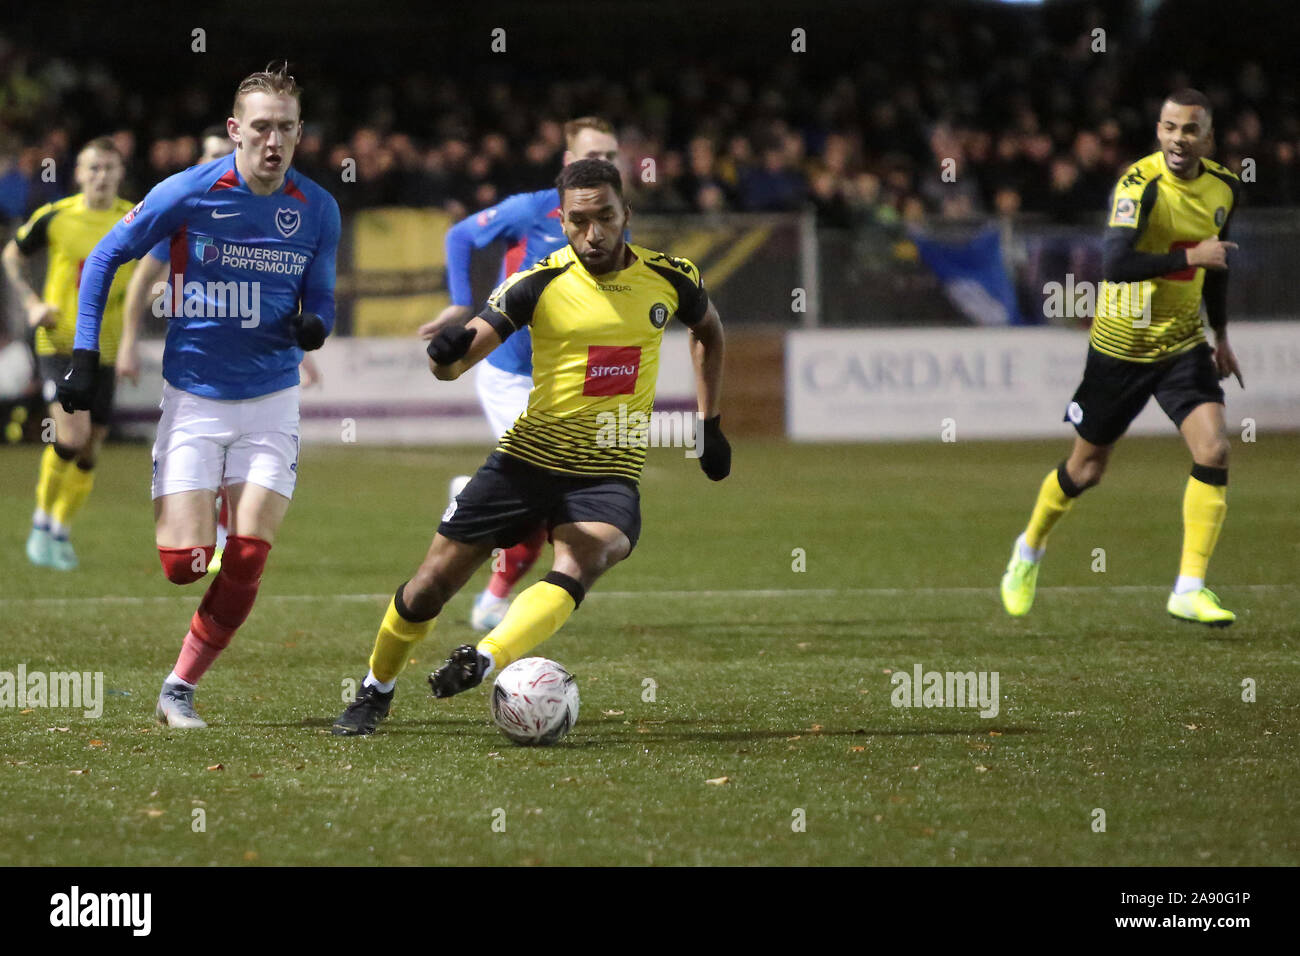 HARROGATE, ENGLAND - NOVEMBER 11TH Brendan Kiernan of Harrogate Town breaks down the wing during the FA Cup 1st round match between Harrogate Town and Portsmouth at Wetherby Road, Harrogate on Monday 11th November 2019. (Credit: Harry Cook | MI News) Photograph may only be used for newspaper and/or magazine editorial purposes, license required for commercial use Credit: MI News & Sport /Alamy Live News Stock Photo